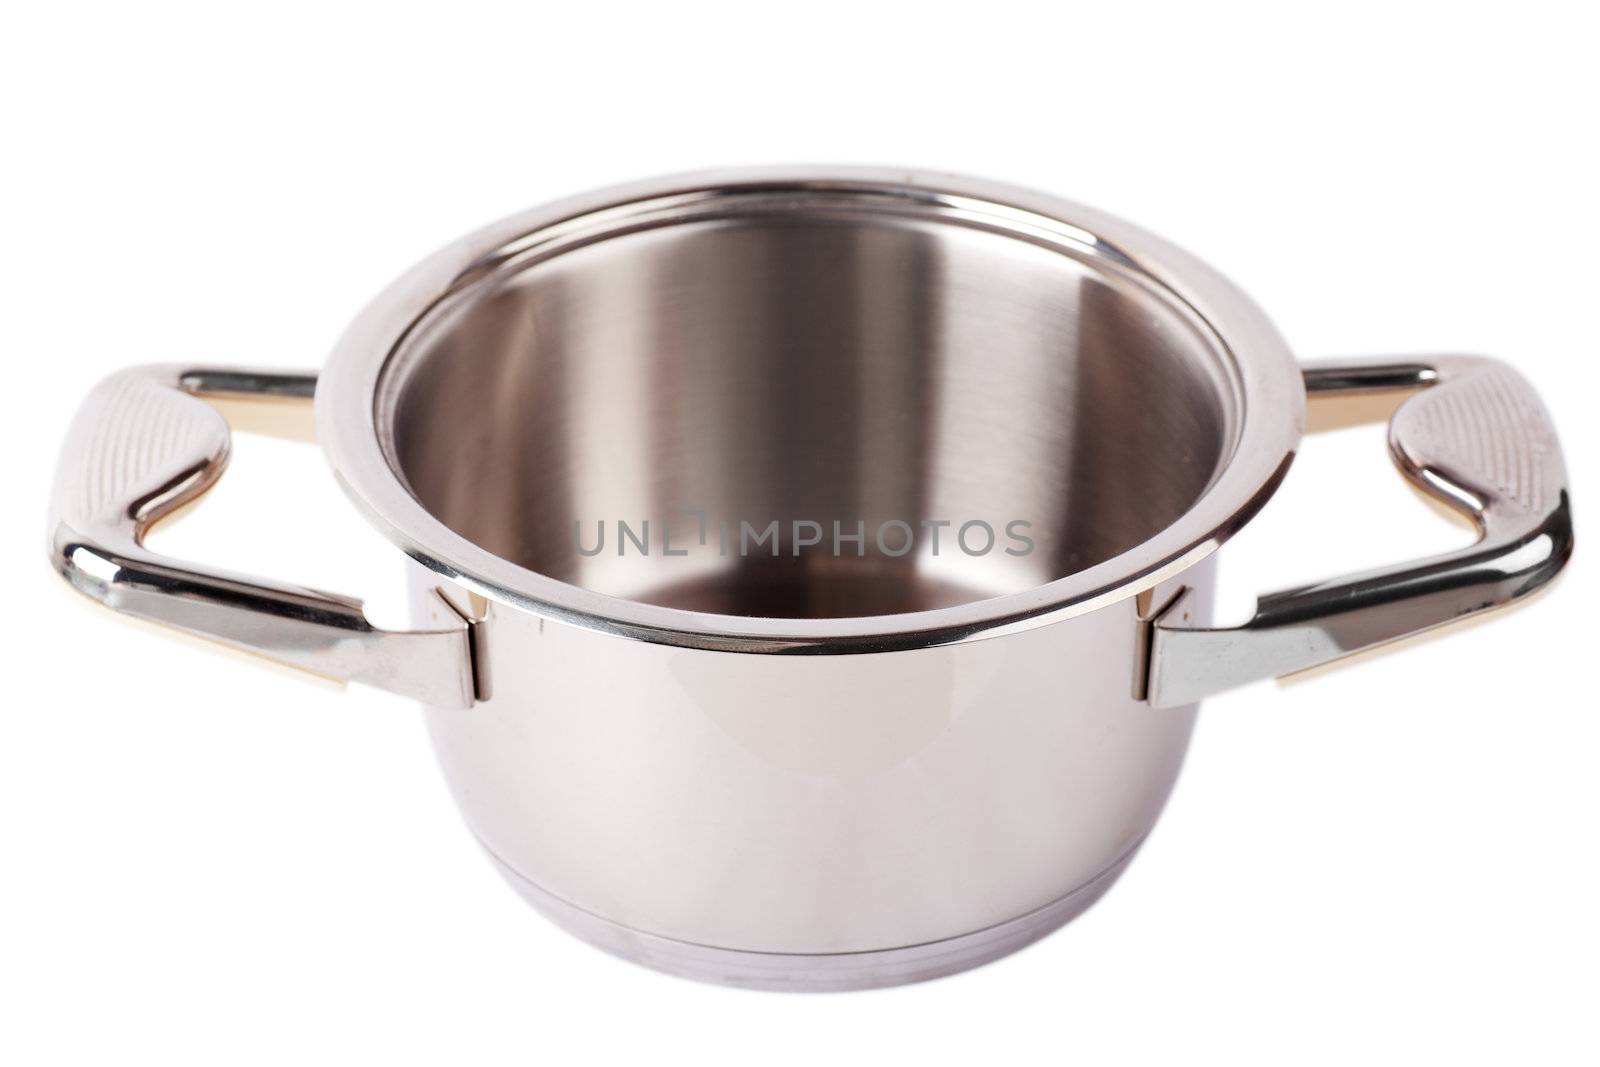 Stainless steel pan by AGorohov